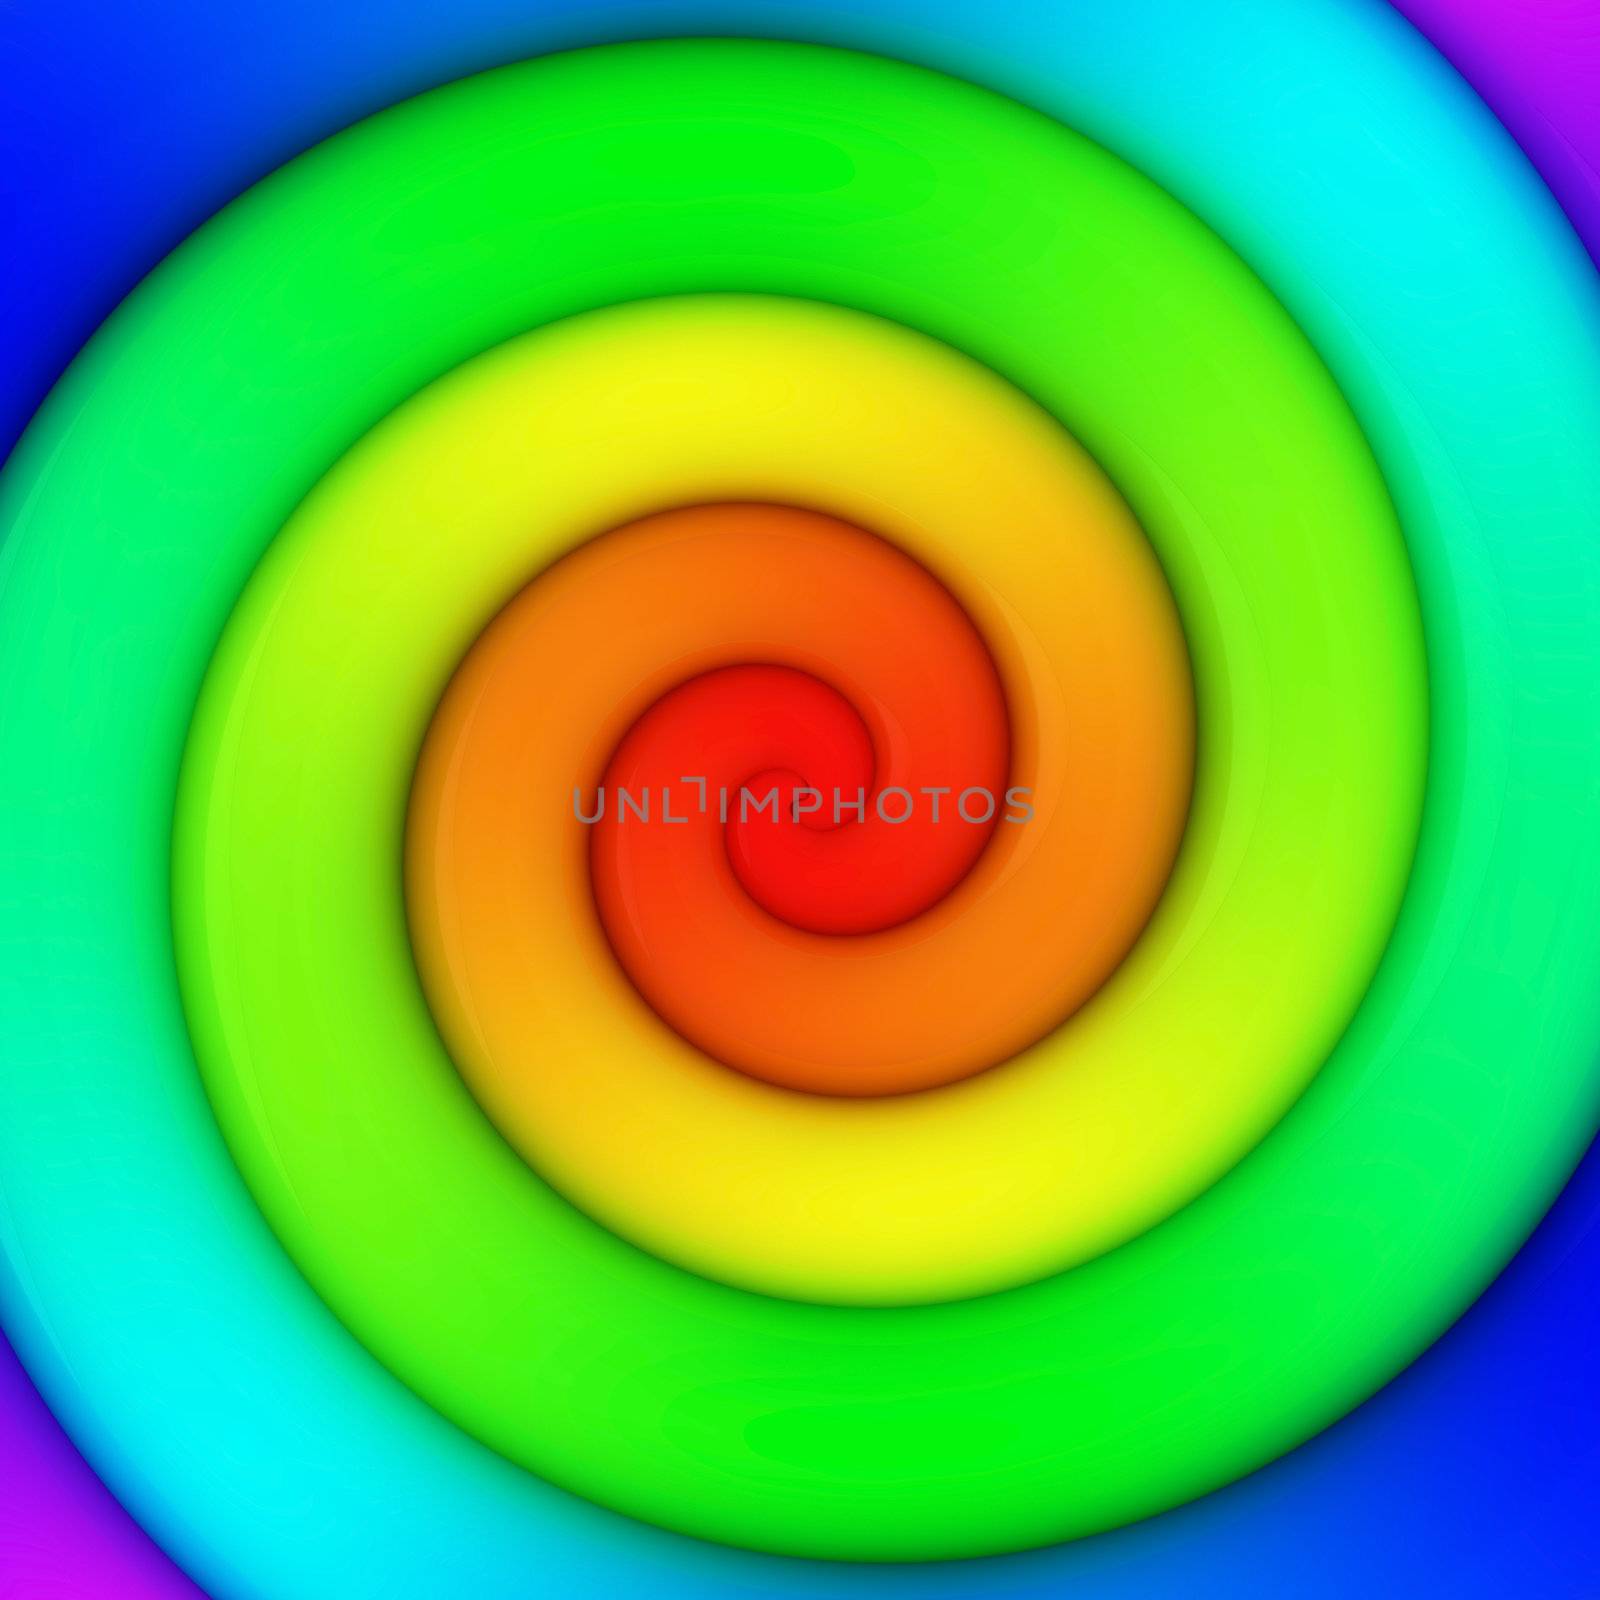 Abstract background of vibrant rainbow spiral swirl